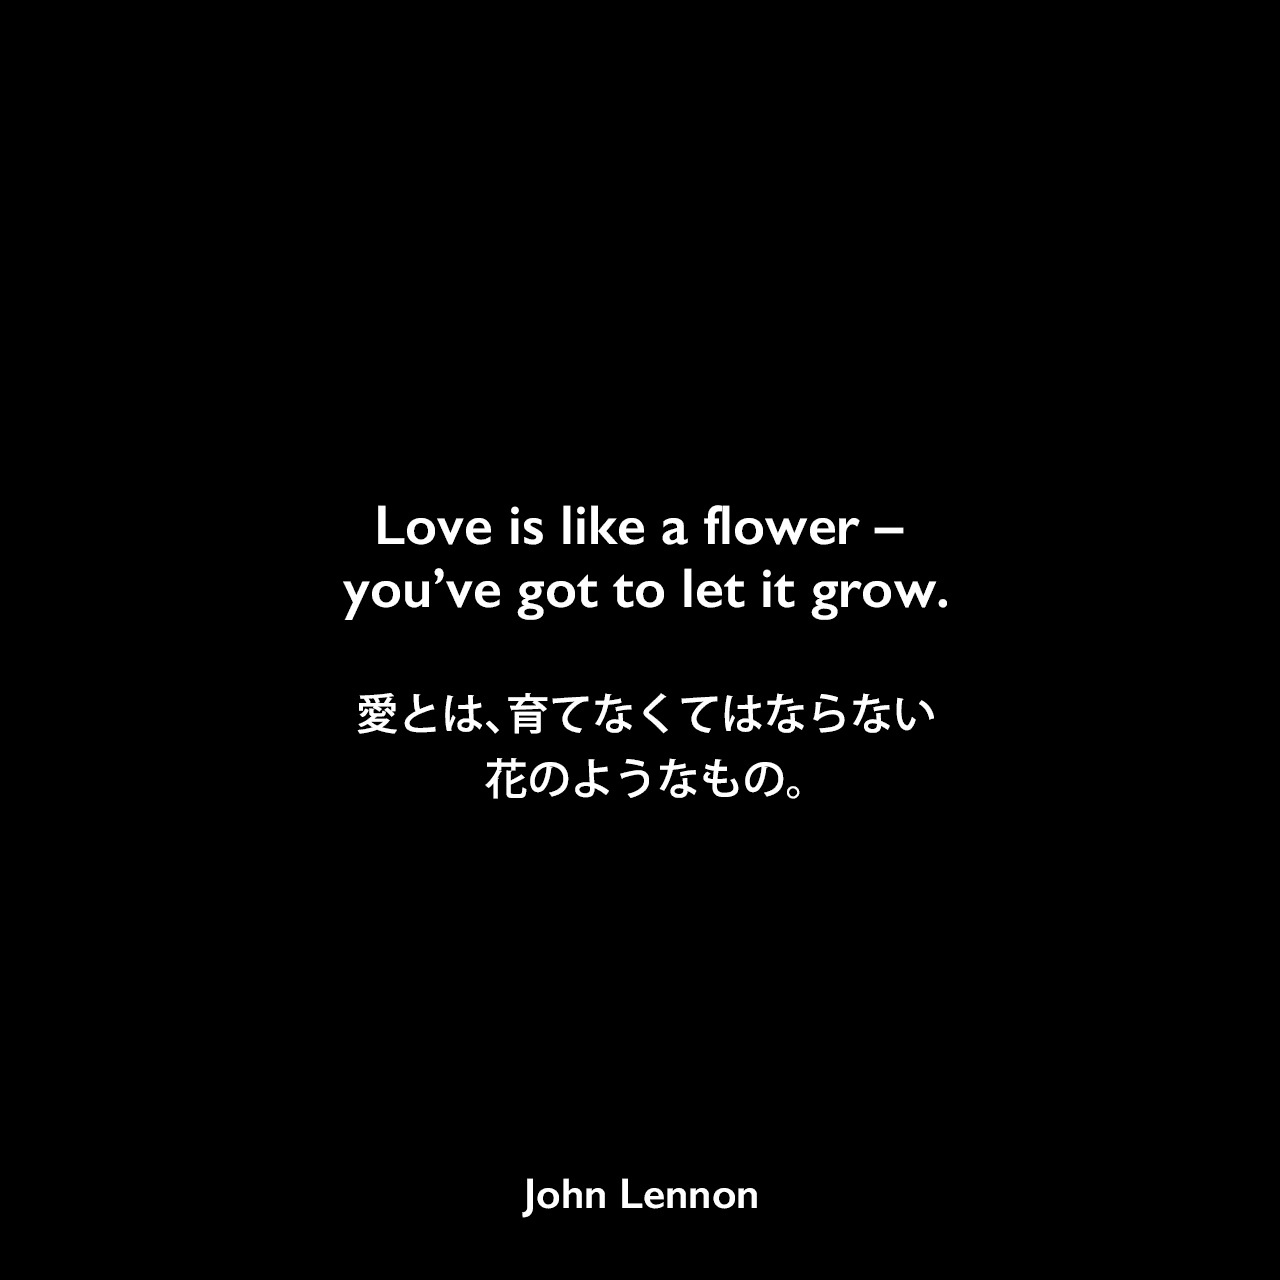 Love is like a flower – you’ve got to let it grow.愛とは、育てなくてはならない花のようなもの。